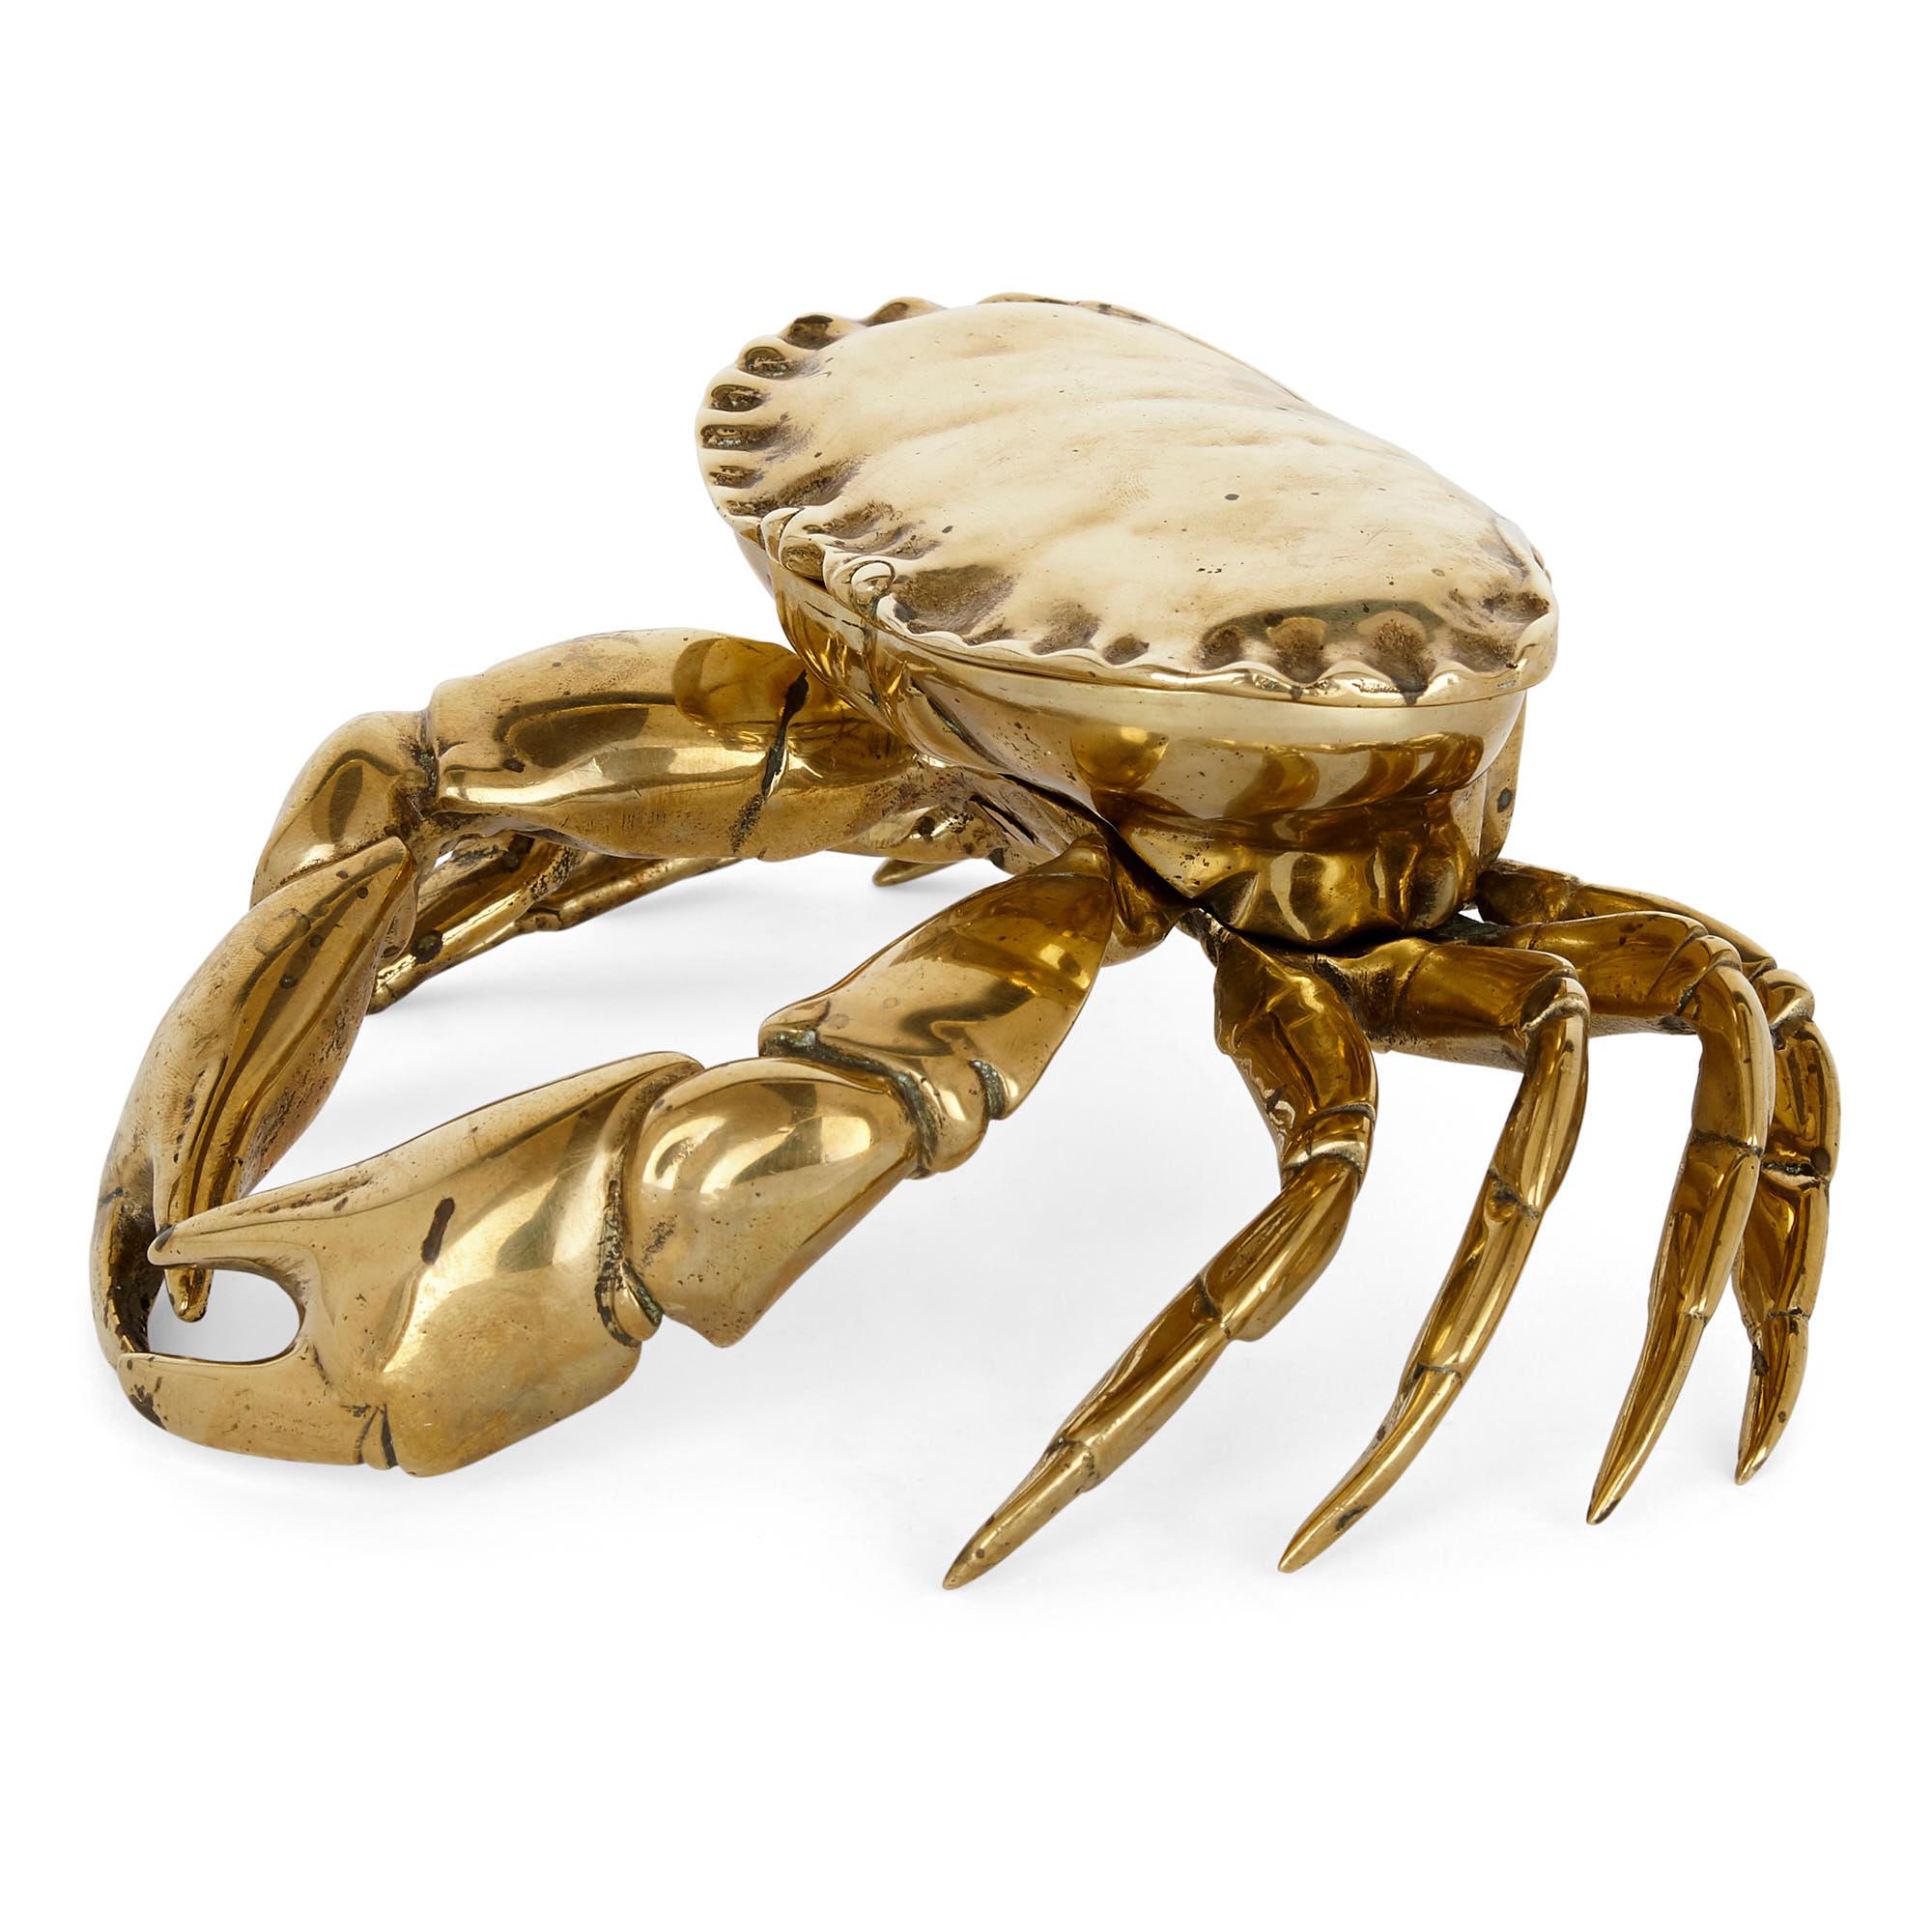 Unusual English crab-shaped brass inkstand
English, late 19th century
Measures: Height 8cm, width 18cm, depth 17cm

This charming brass inkstand takes the form of a naturalistically modelled crab. The hinged top of the crab opens to reveal the